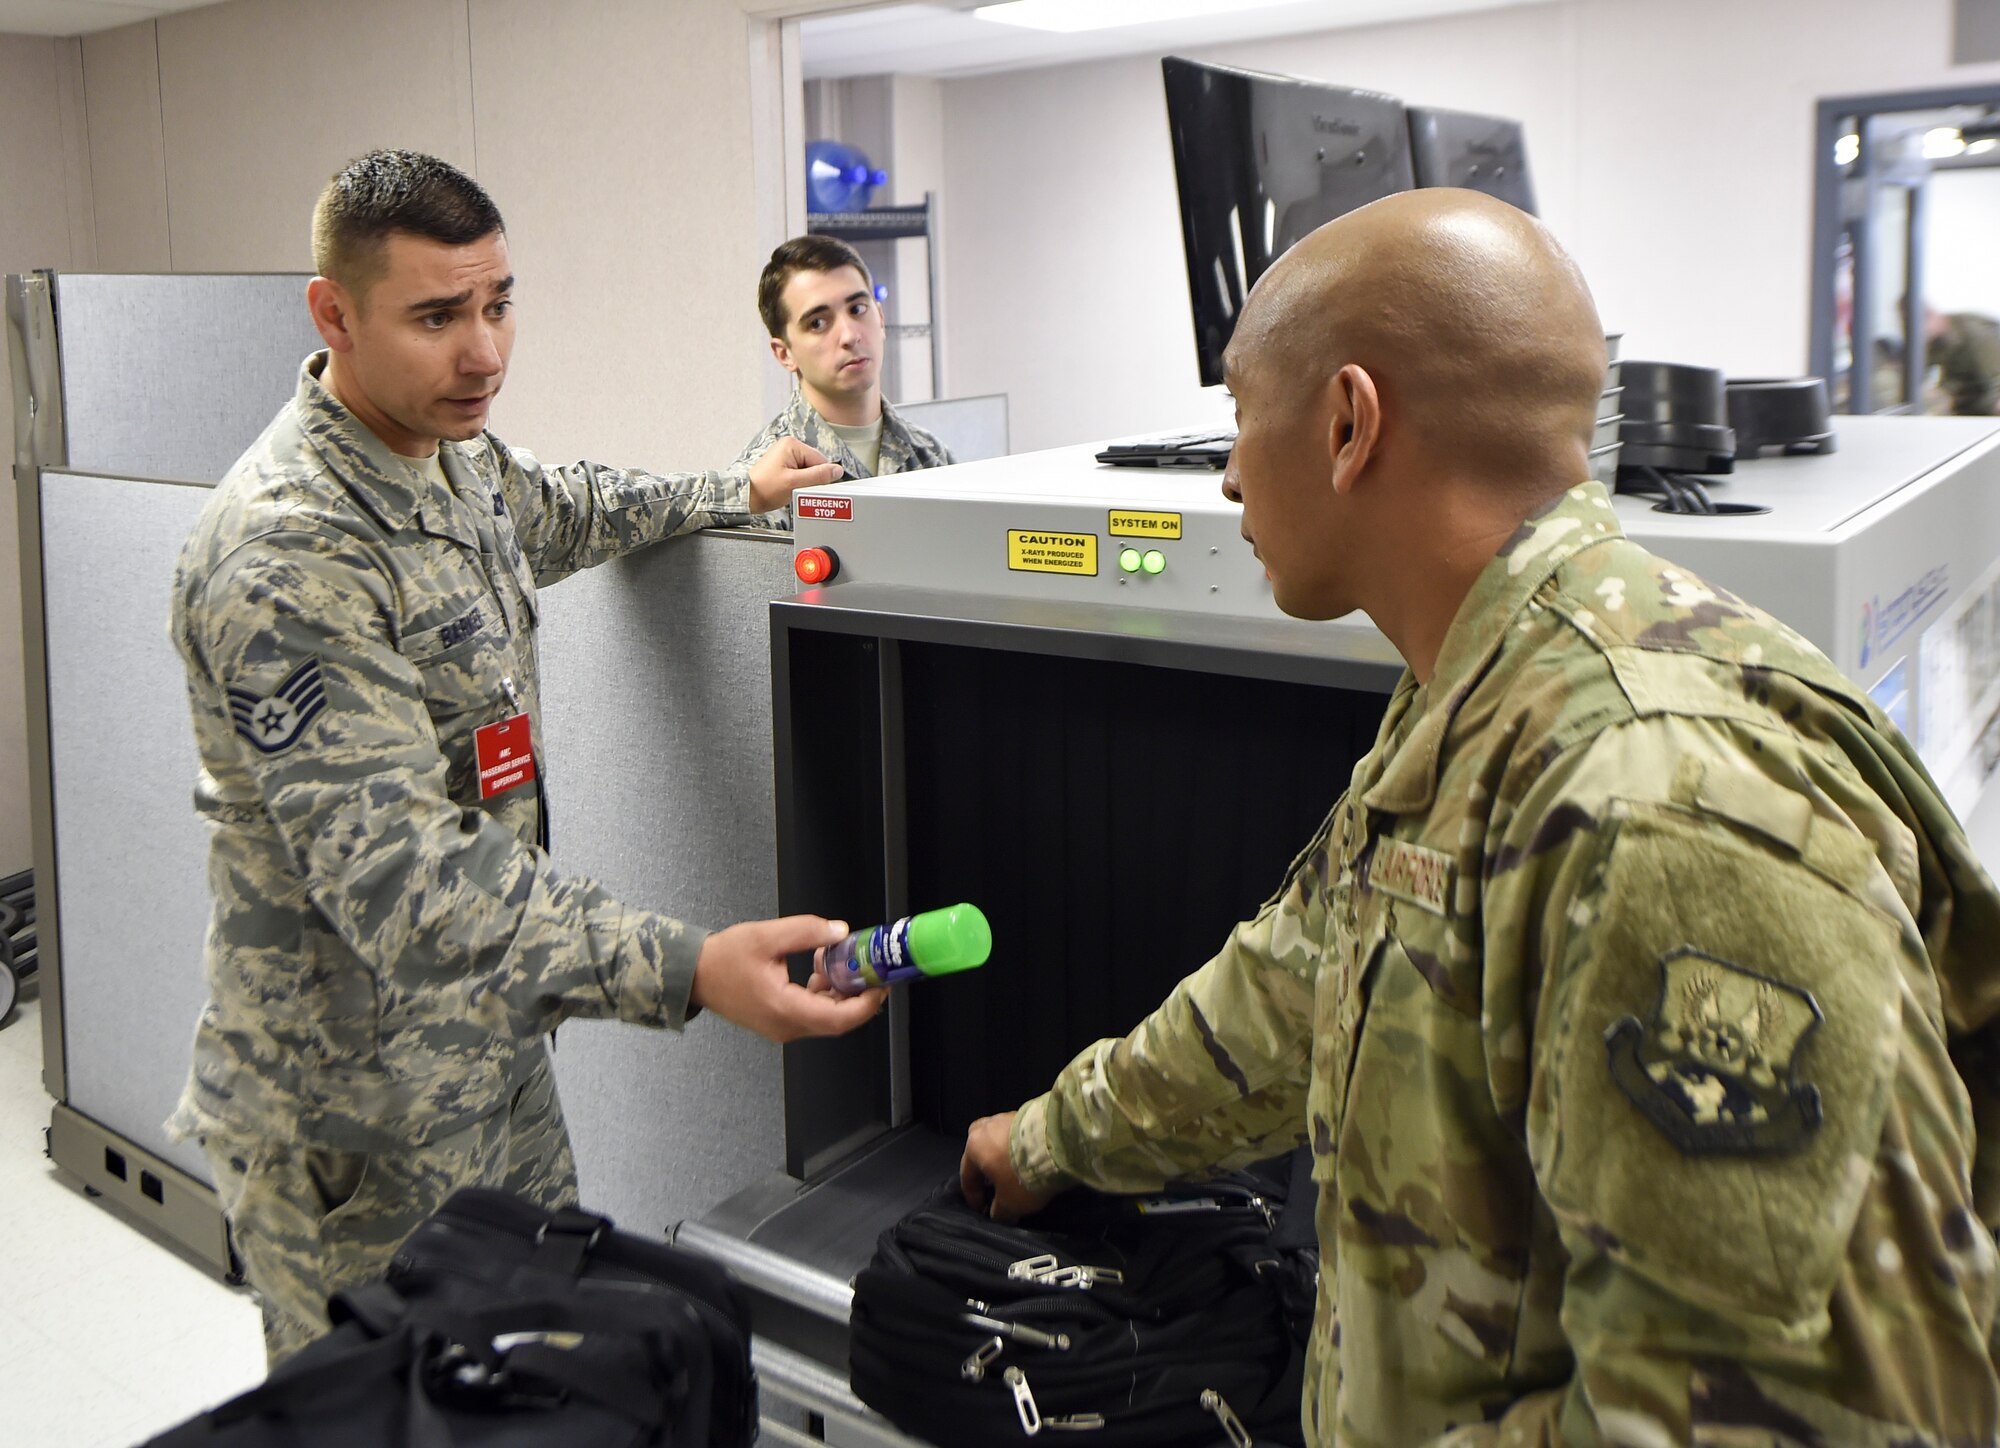 Staff Sgt. James Barker, 437th Aerial Port Squadron passenger operations supervisor, removes an unauthorized item from a bag at a security checkpoint Oct. 15, 2018.